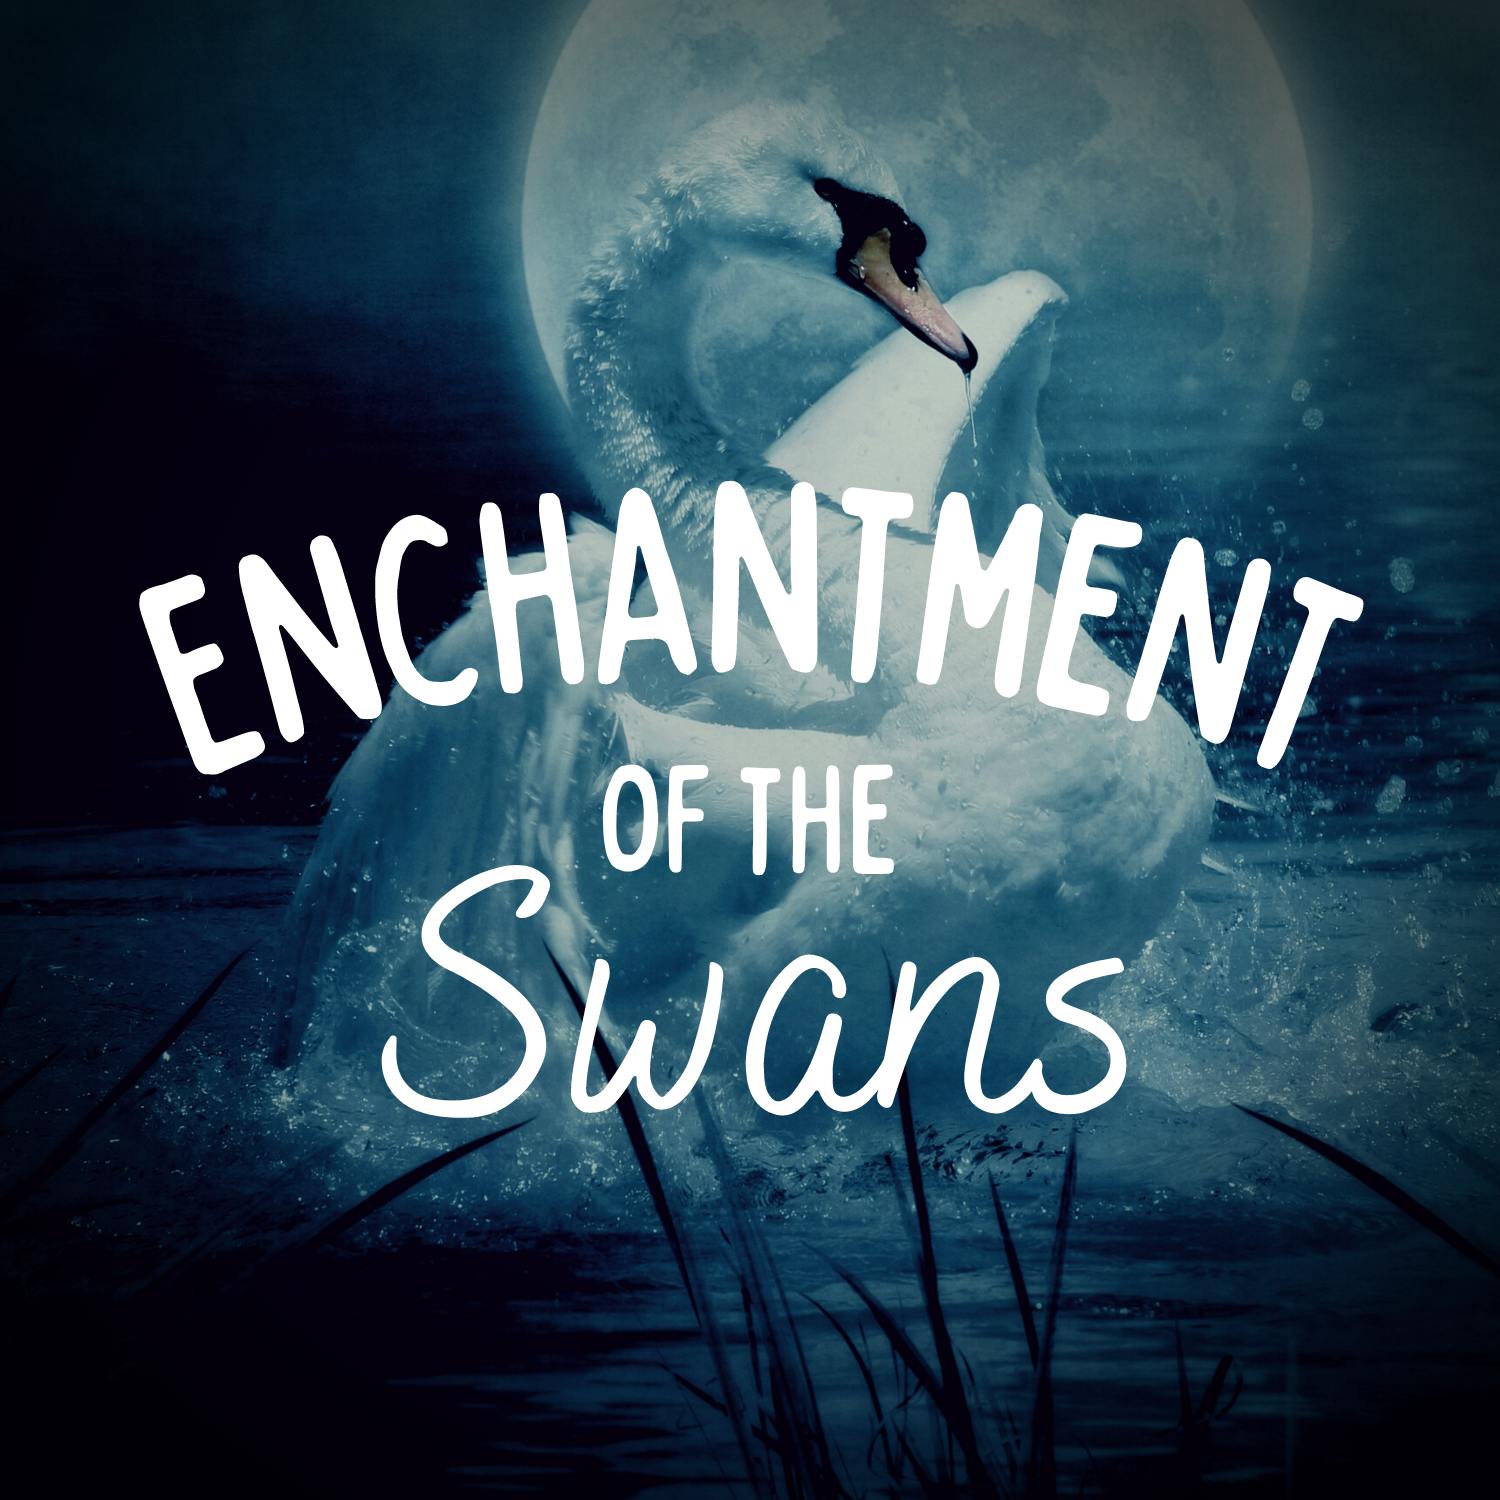 Enchantment of the Swans